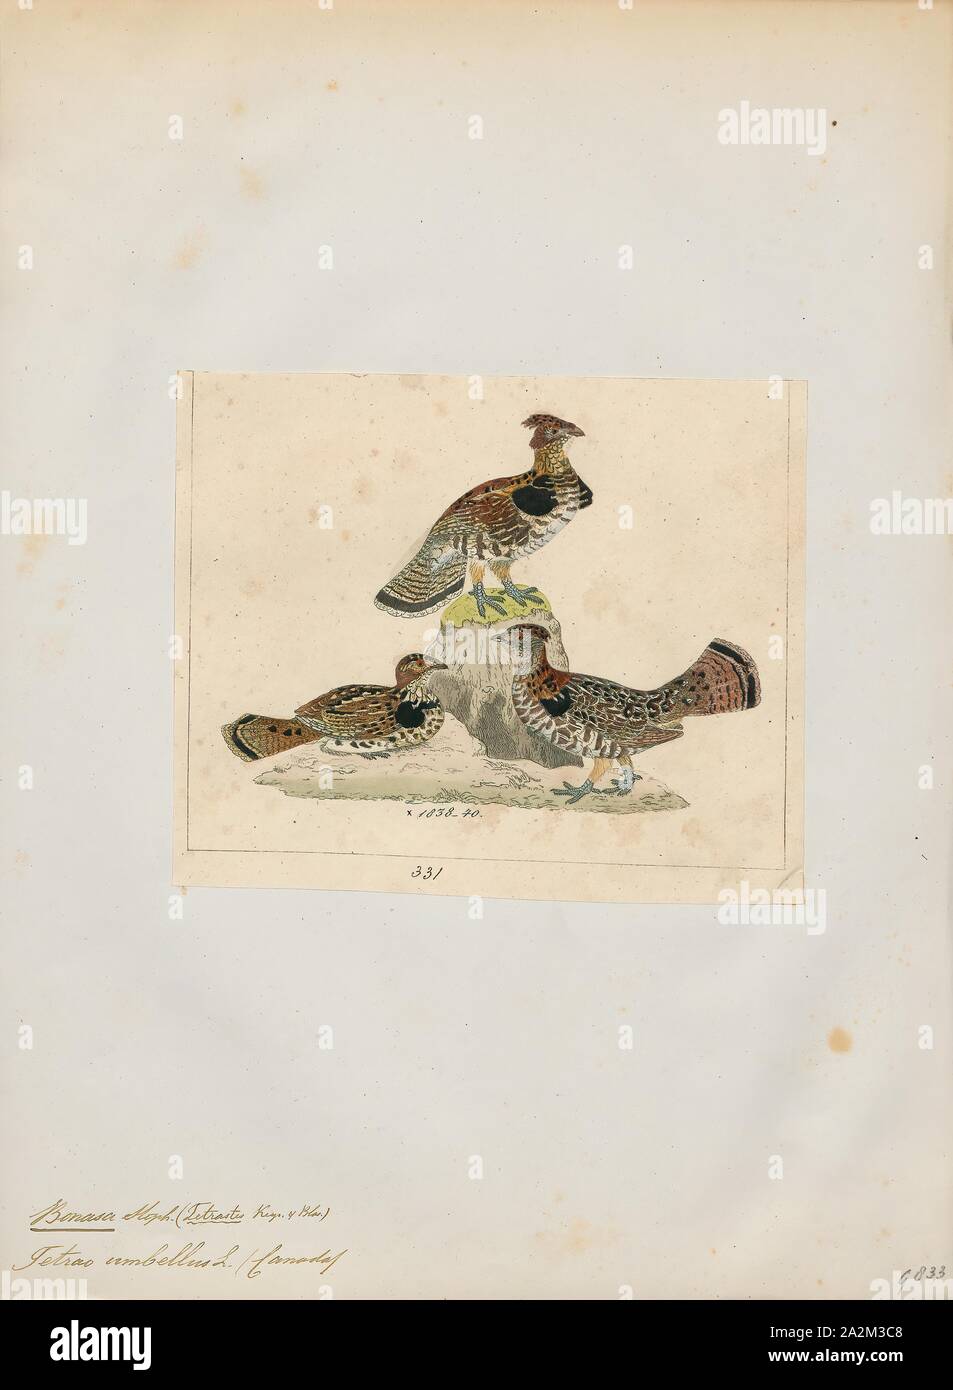 Bonasa umbellus, Print, The ruffed grouse (Bonasa umbellus) is a medium-sized grouse occurring in forests from the Appalachian Mountains across Canada to Alaska. It is non-migratory. It is the only species in the genus Bonasa., 1820-1863 Stock Photo